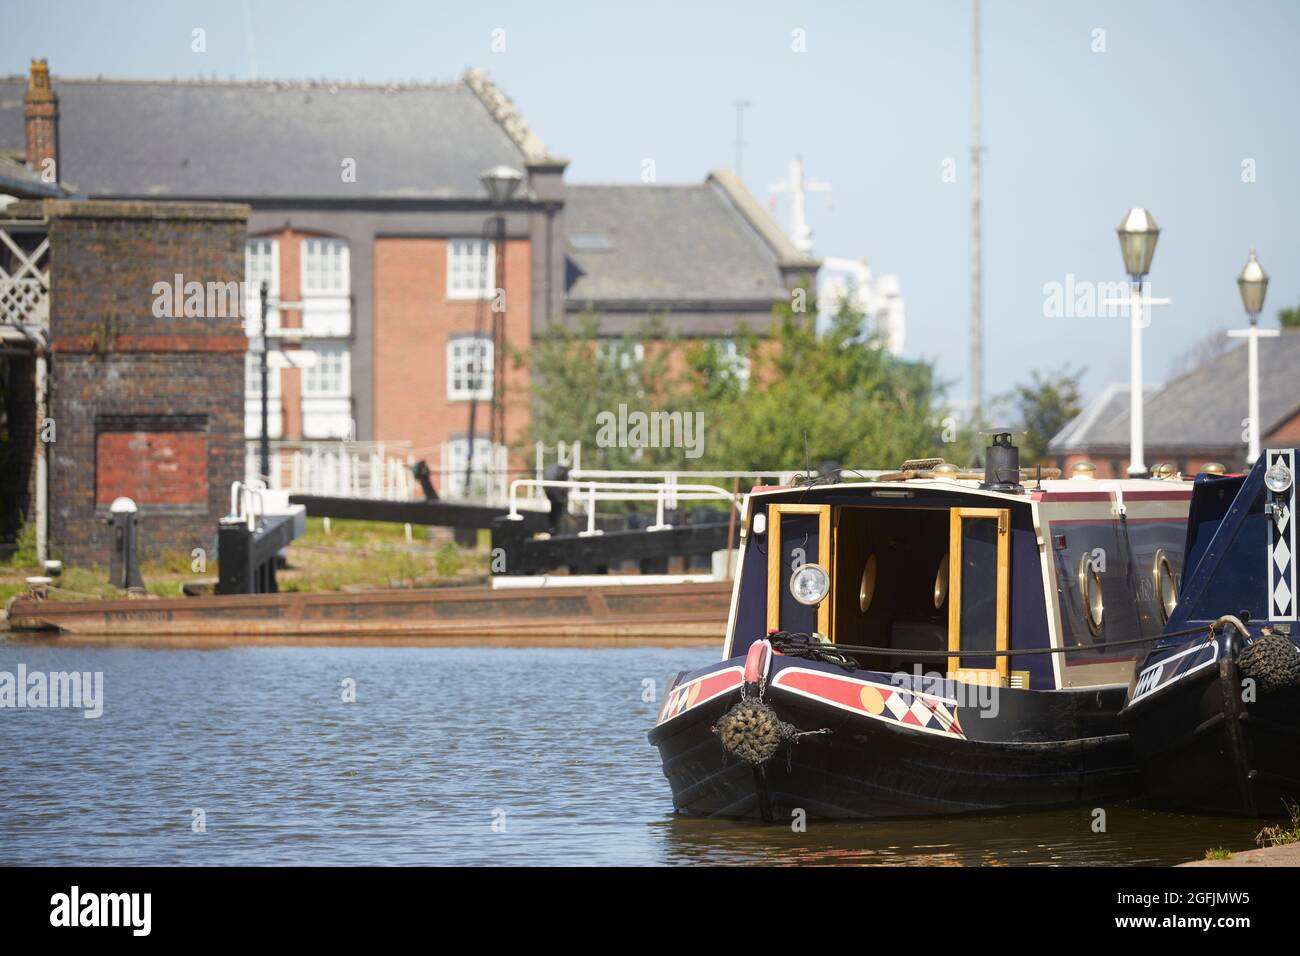 National Waterways Museum Ellesmere Port, end of the Shropshire Union Canal where it meets the Manchester Ship Canal Stock Photo